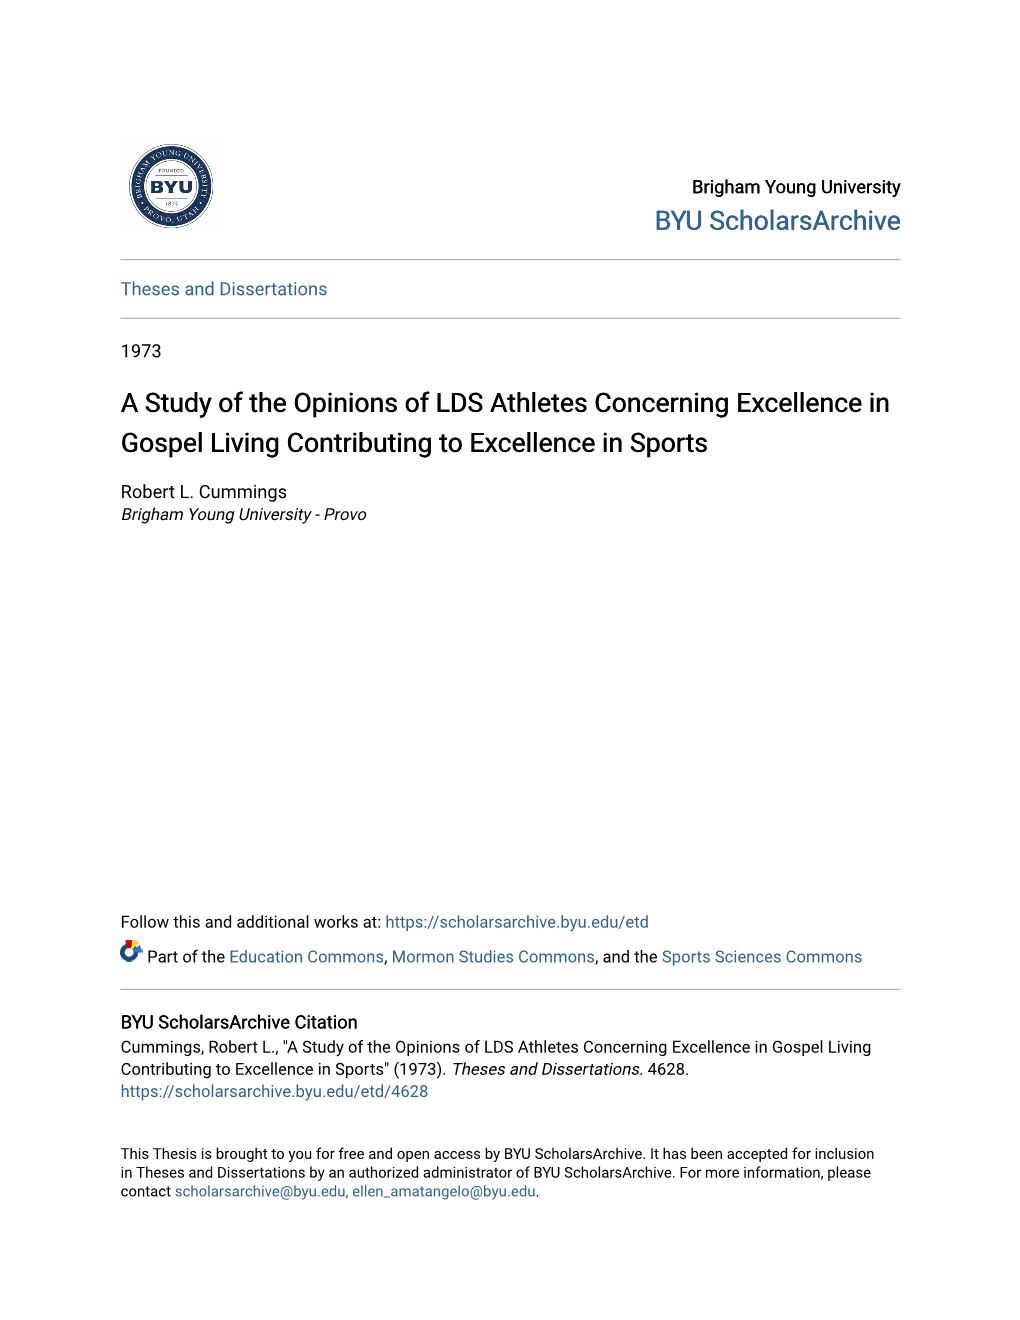 A Study of the Opinions of LDS Athletes Concerning Excellence in Gospel Living Contributing to Excellence in Sports